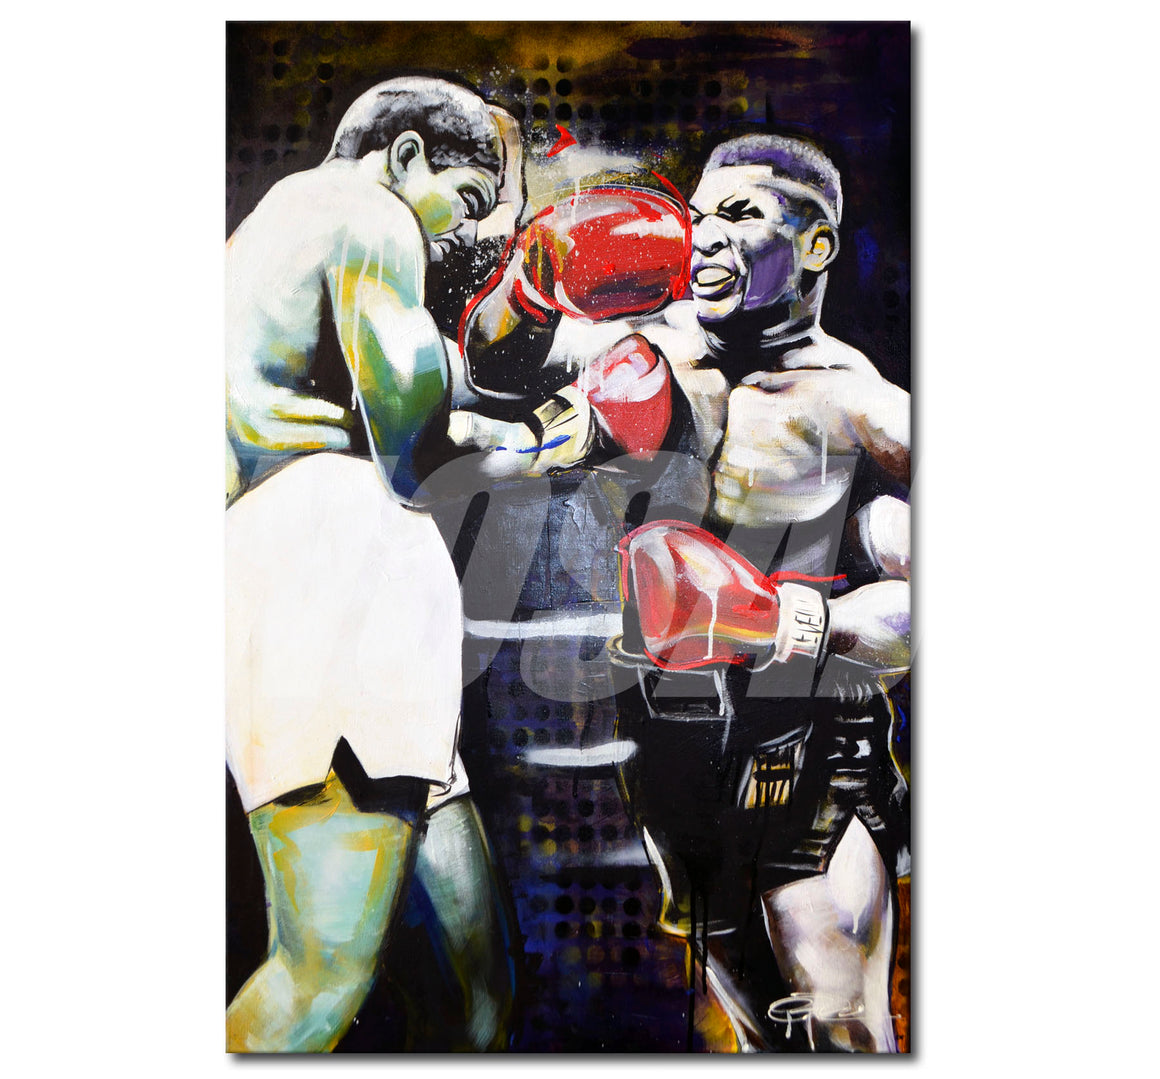 "Punch Out" by Jason Ford